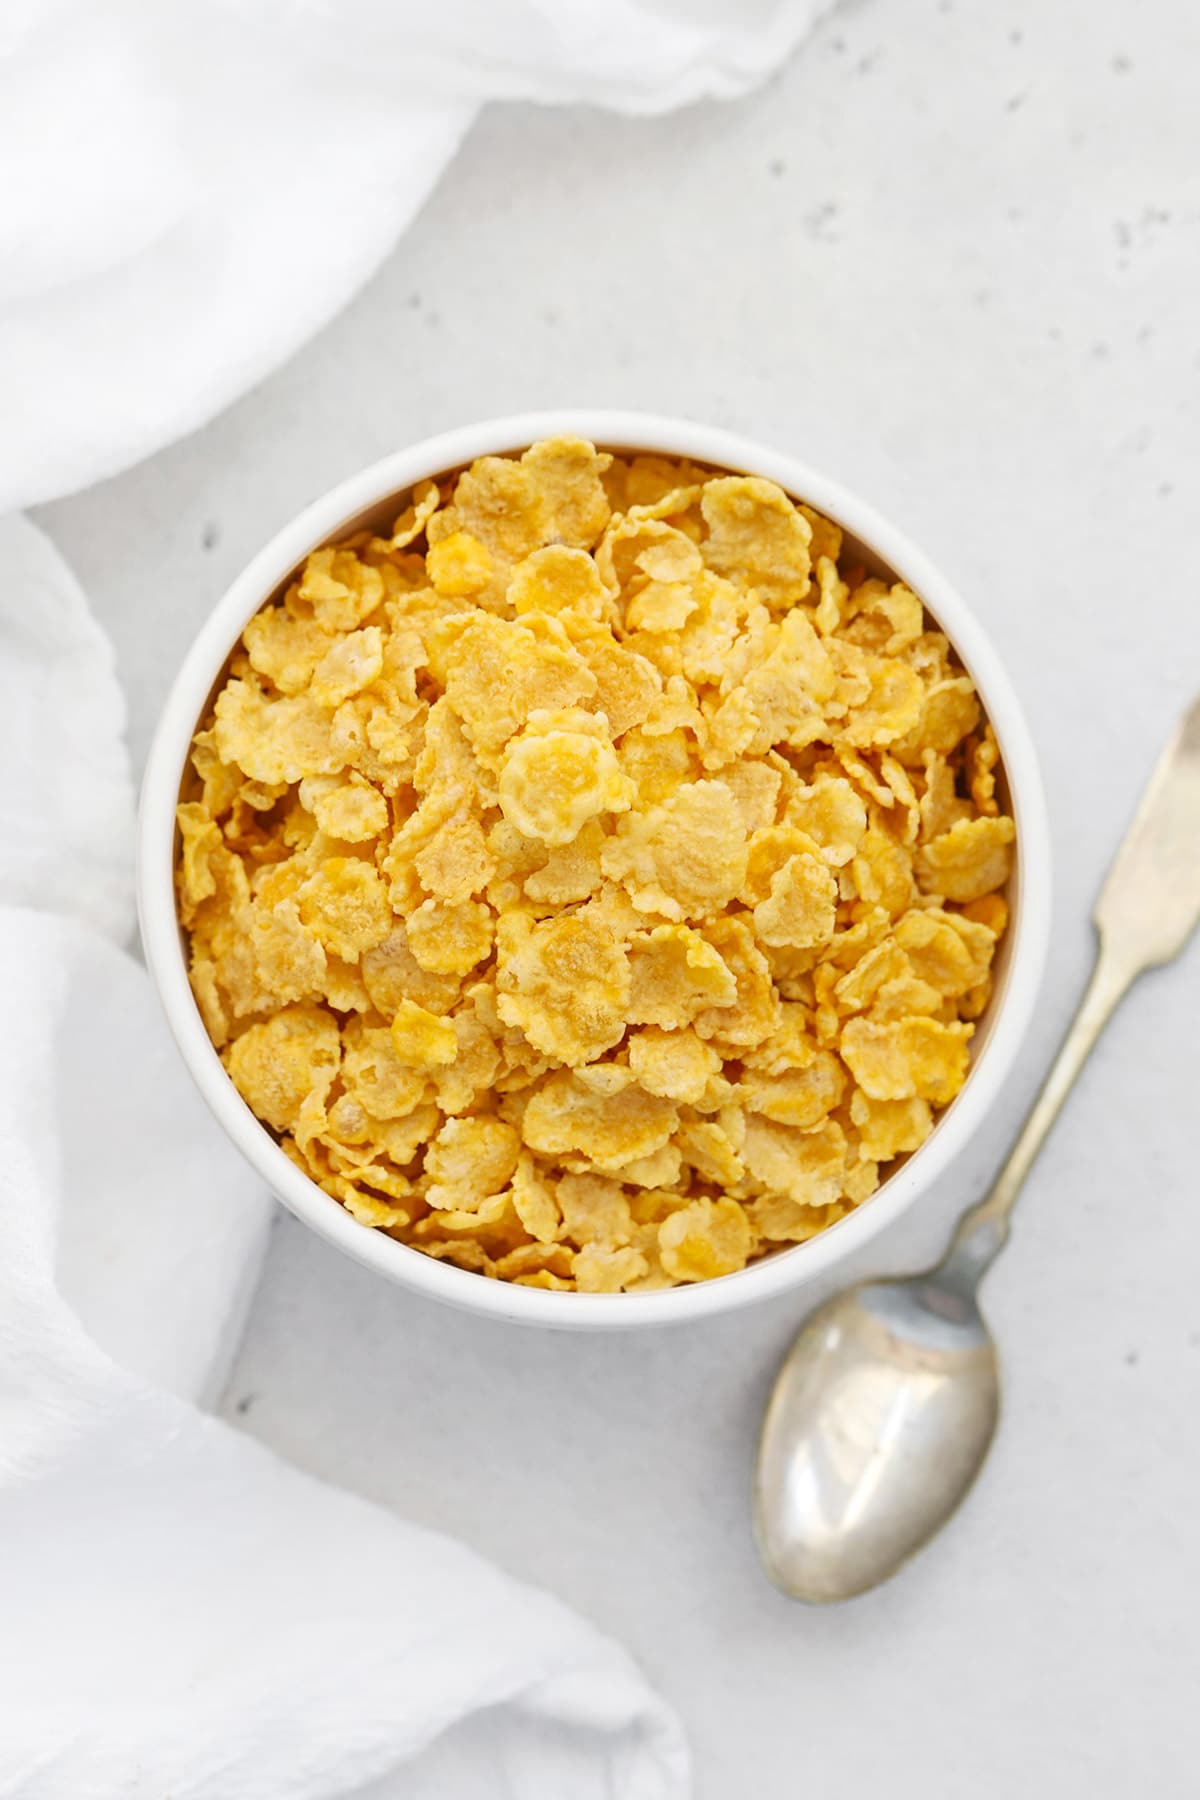 Overhead view of a white bowl of gluten free corn flakes